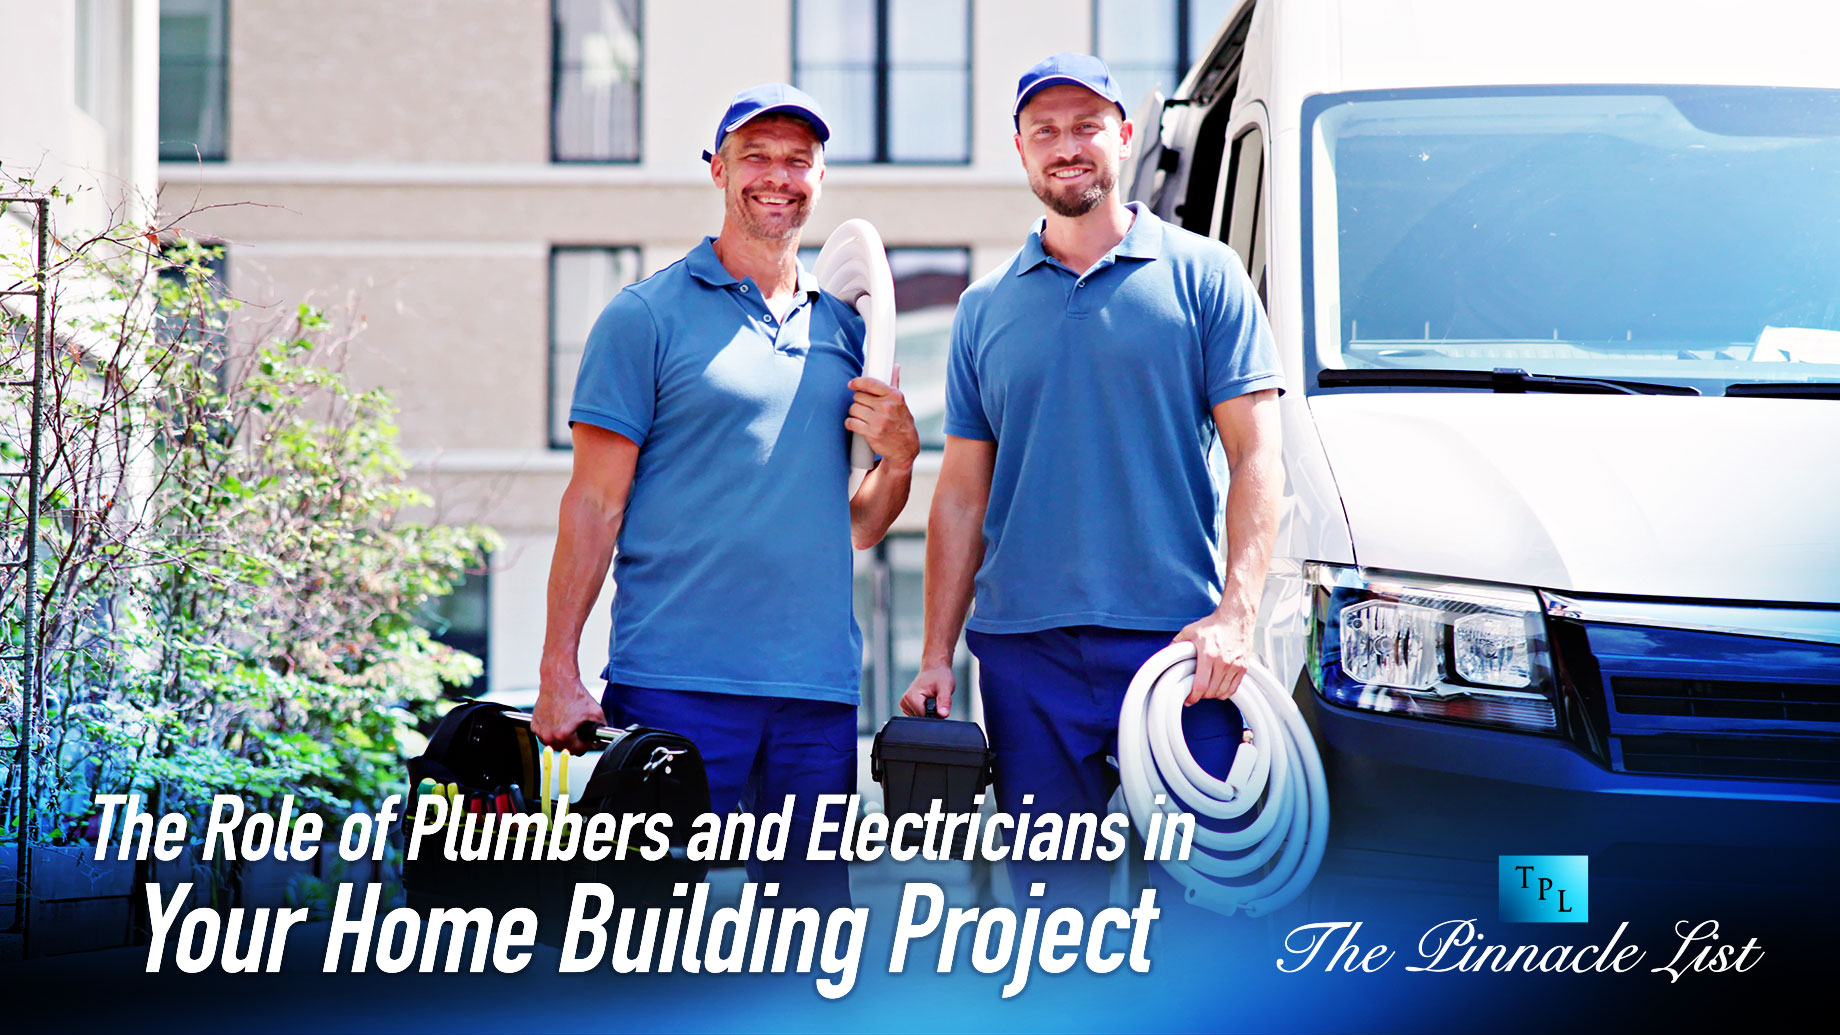 The Role of Plumbers and Electricians in Your Home Building Project